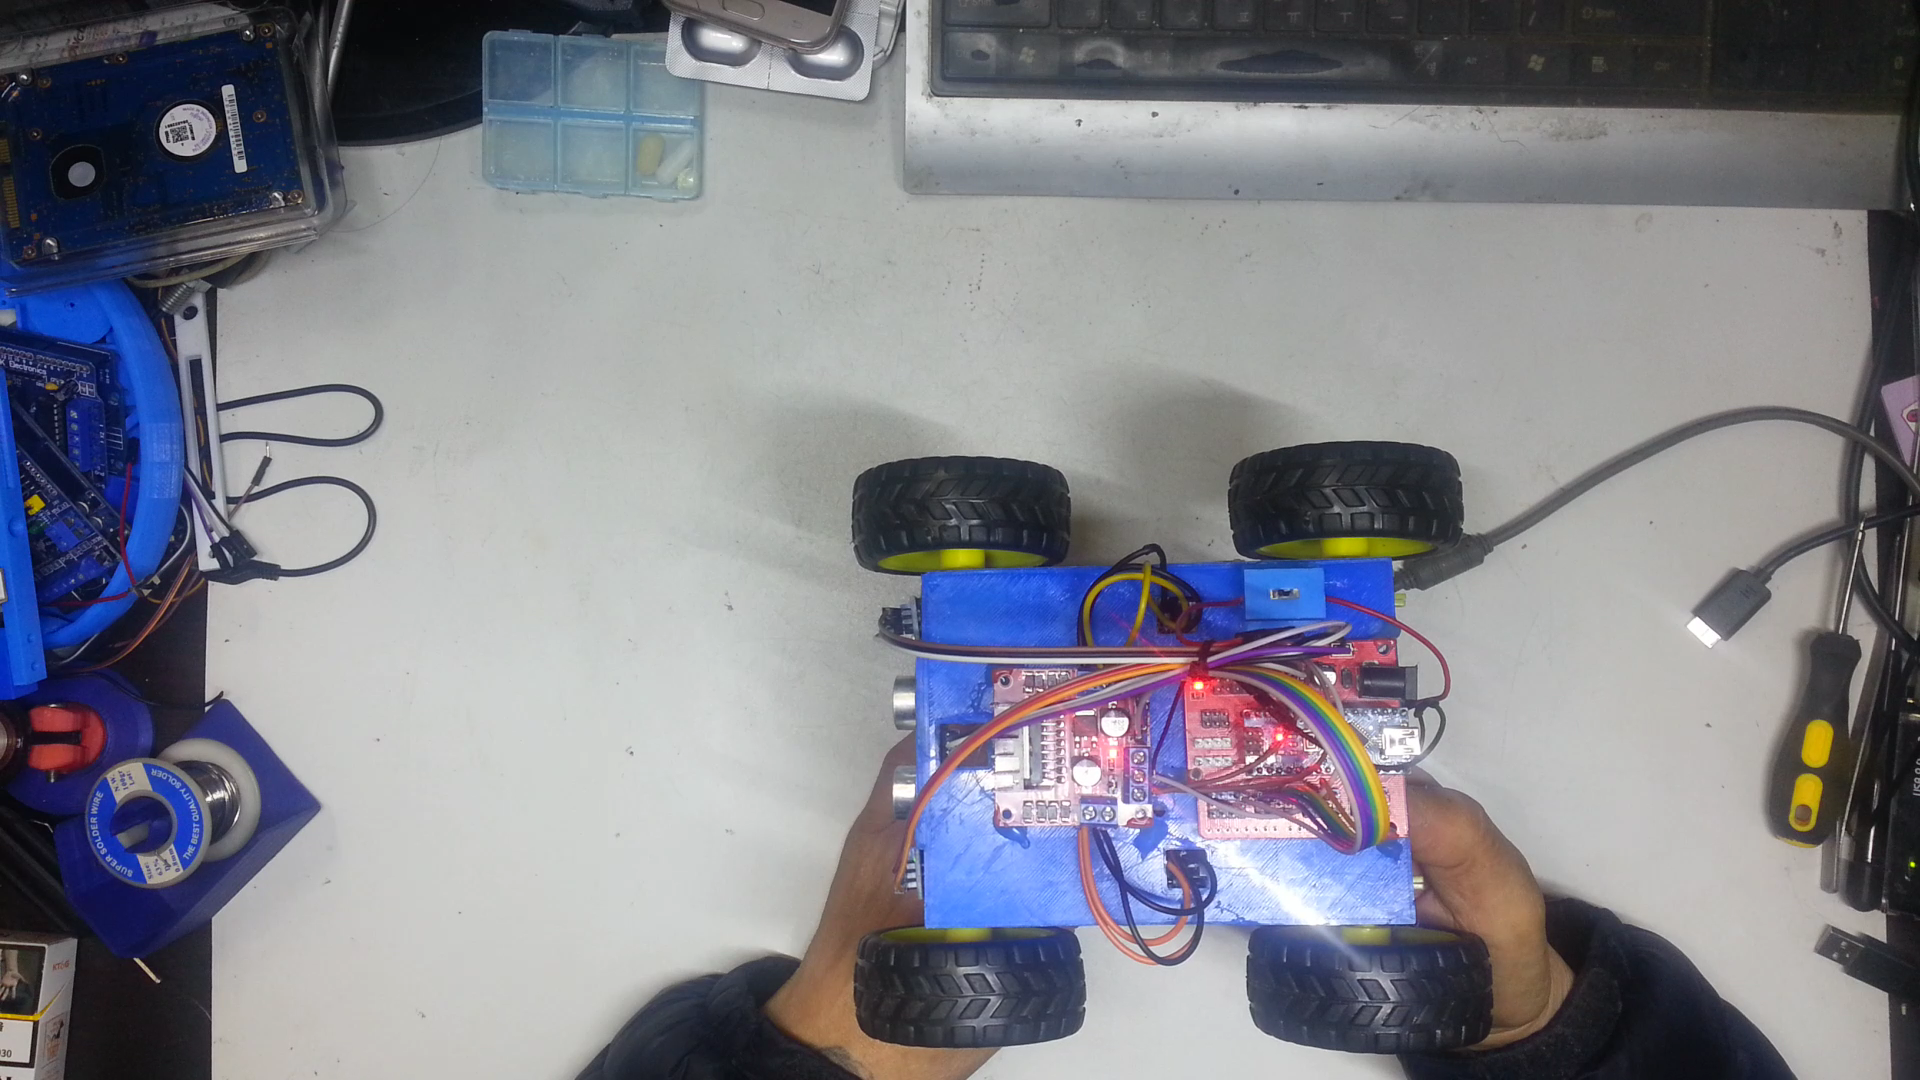 obstacle avoidance robot car with line following